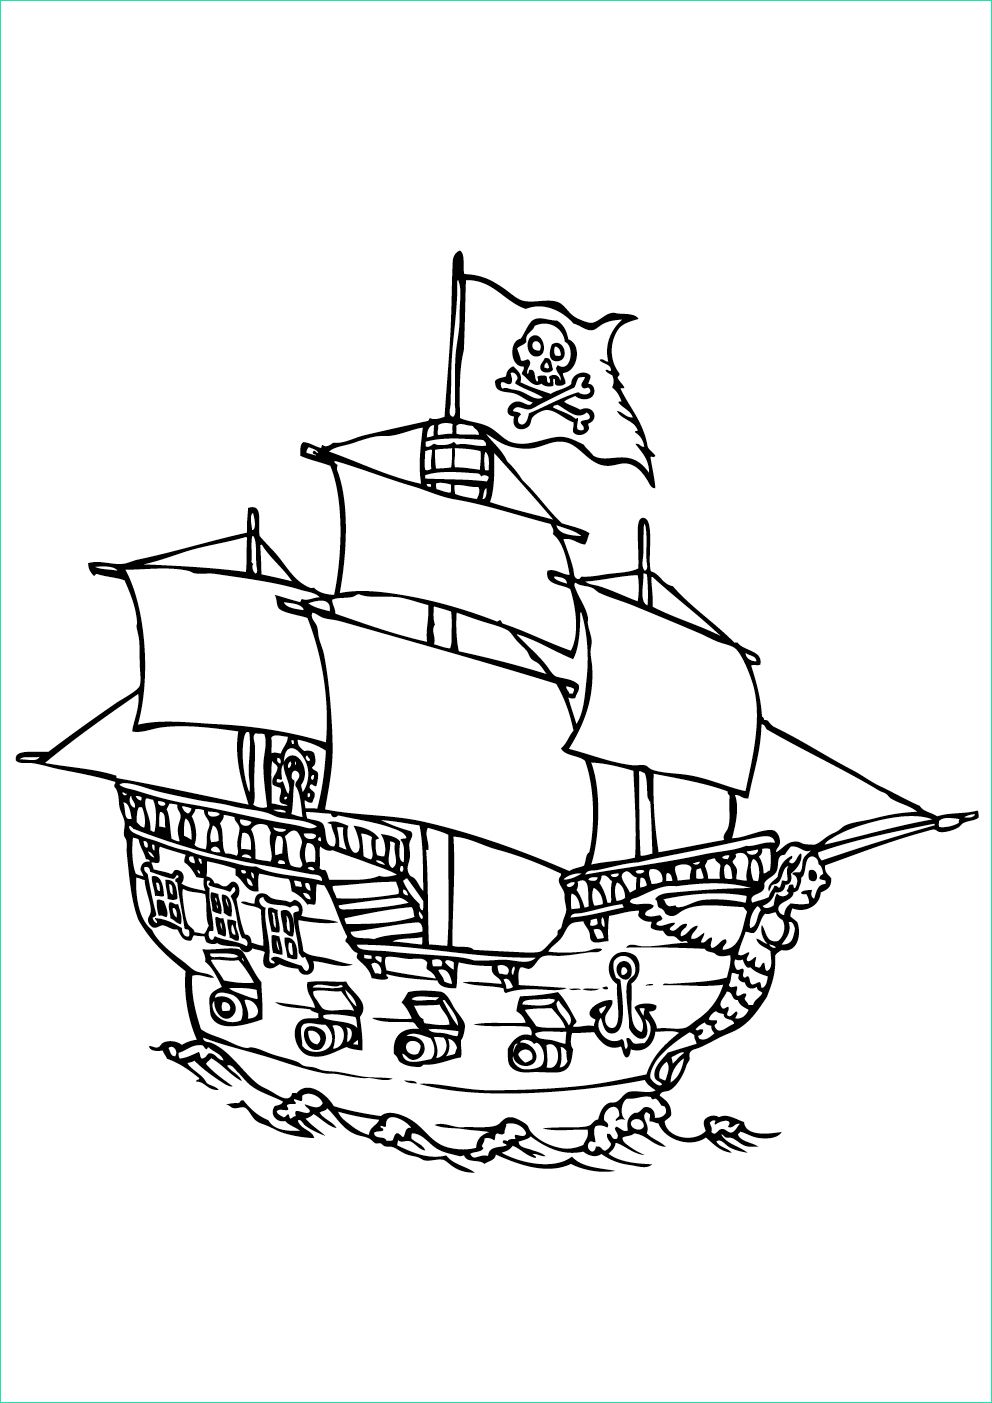 Pirate Coloriage Beau Images Pirates to Color for Kids Pirates Kids Coloring Pages